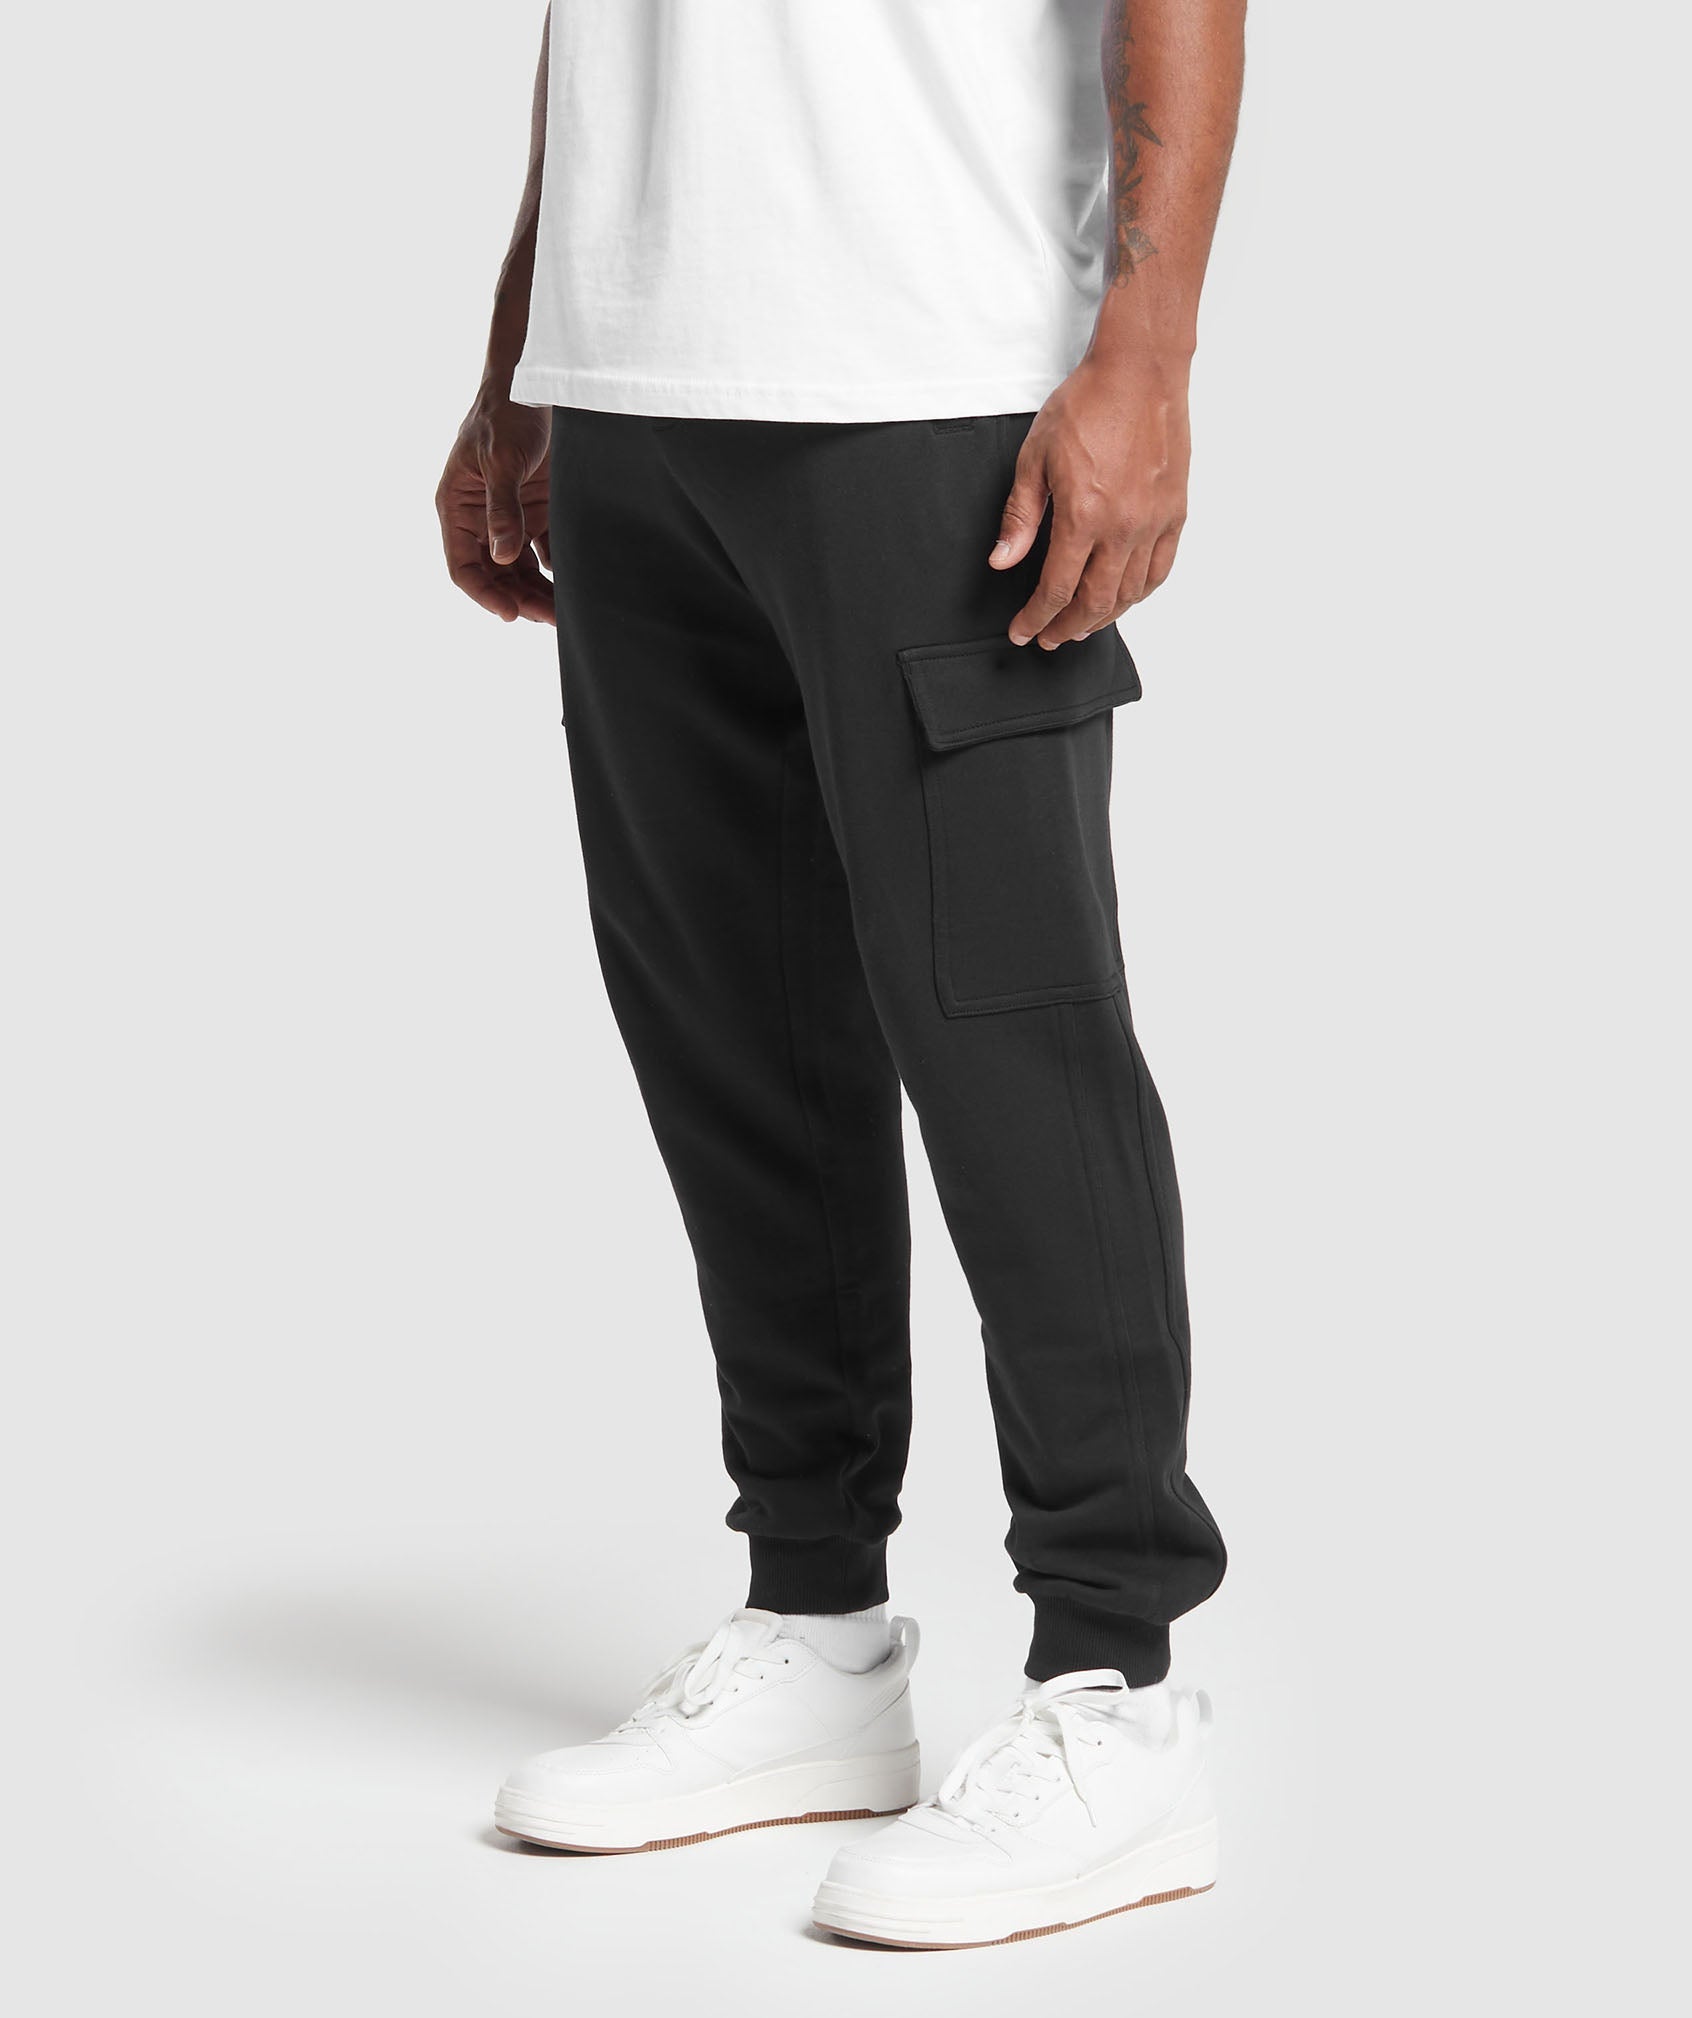 Men's Joggers  From Workout to Chill Out